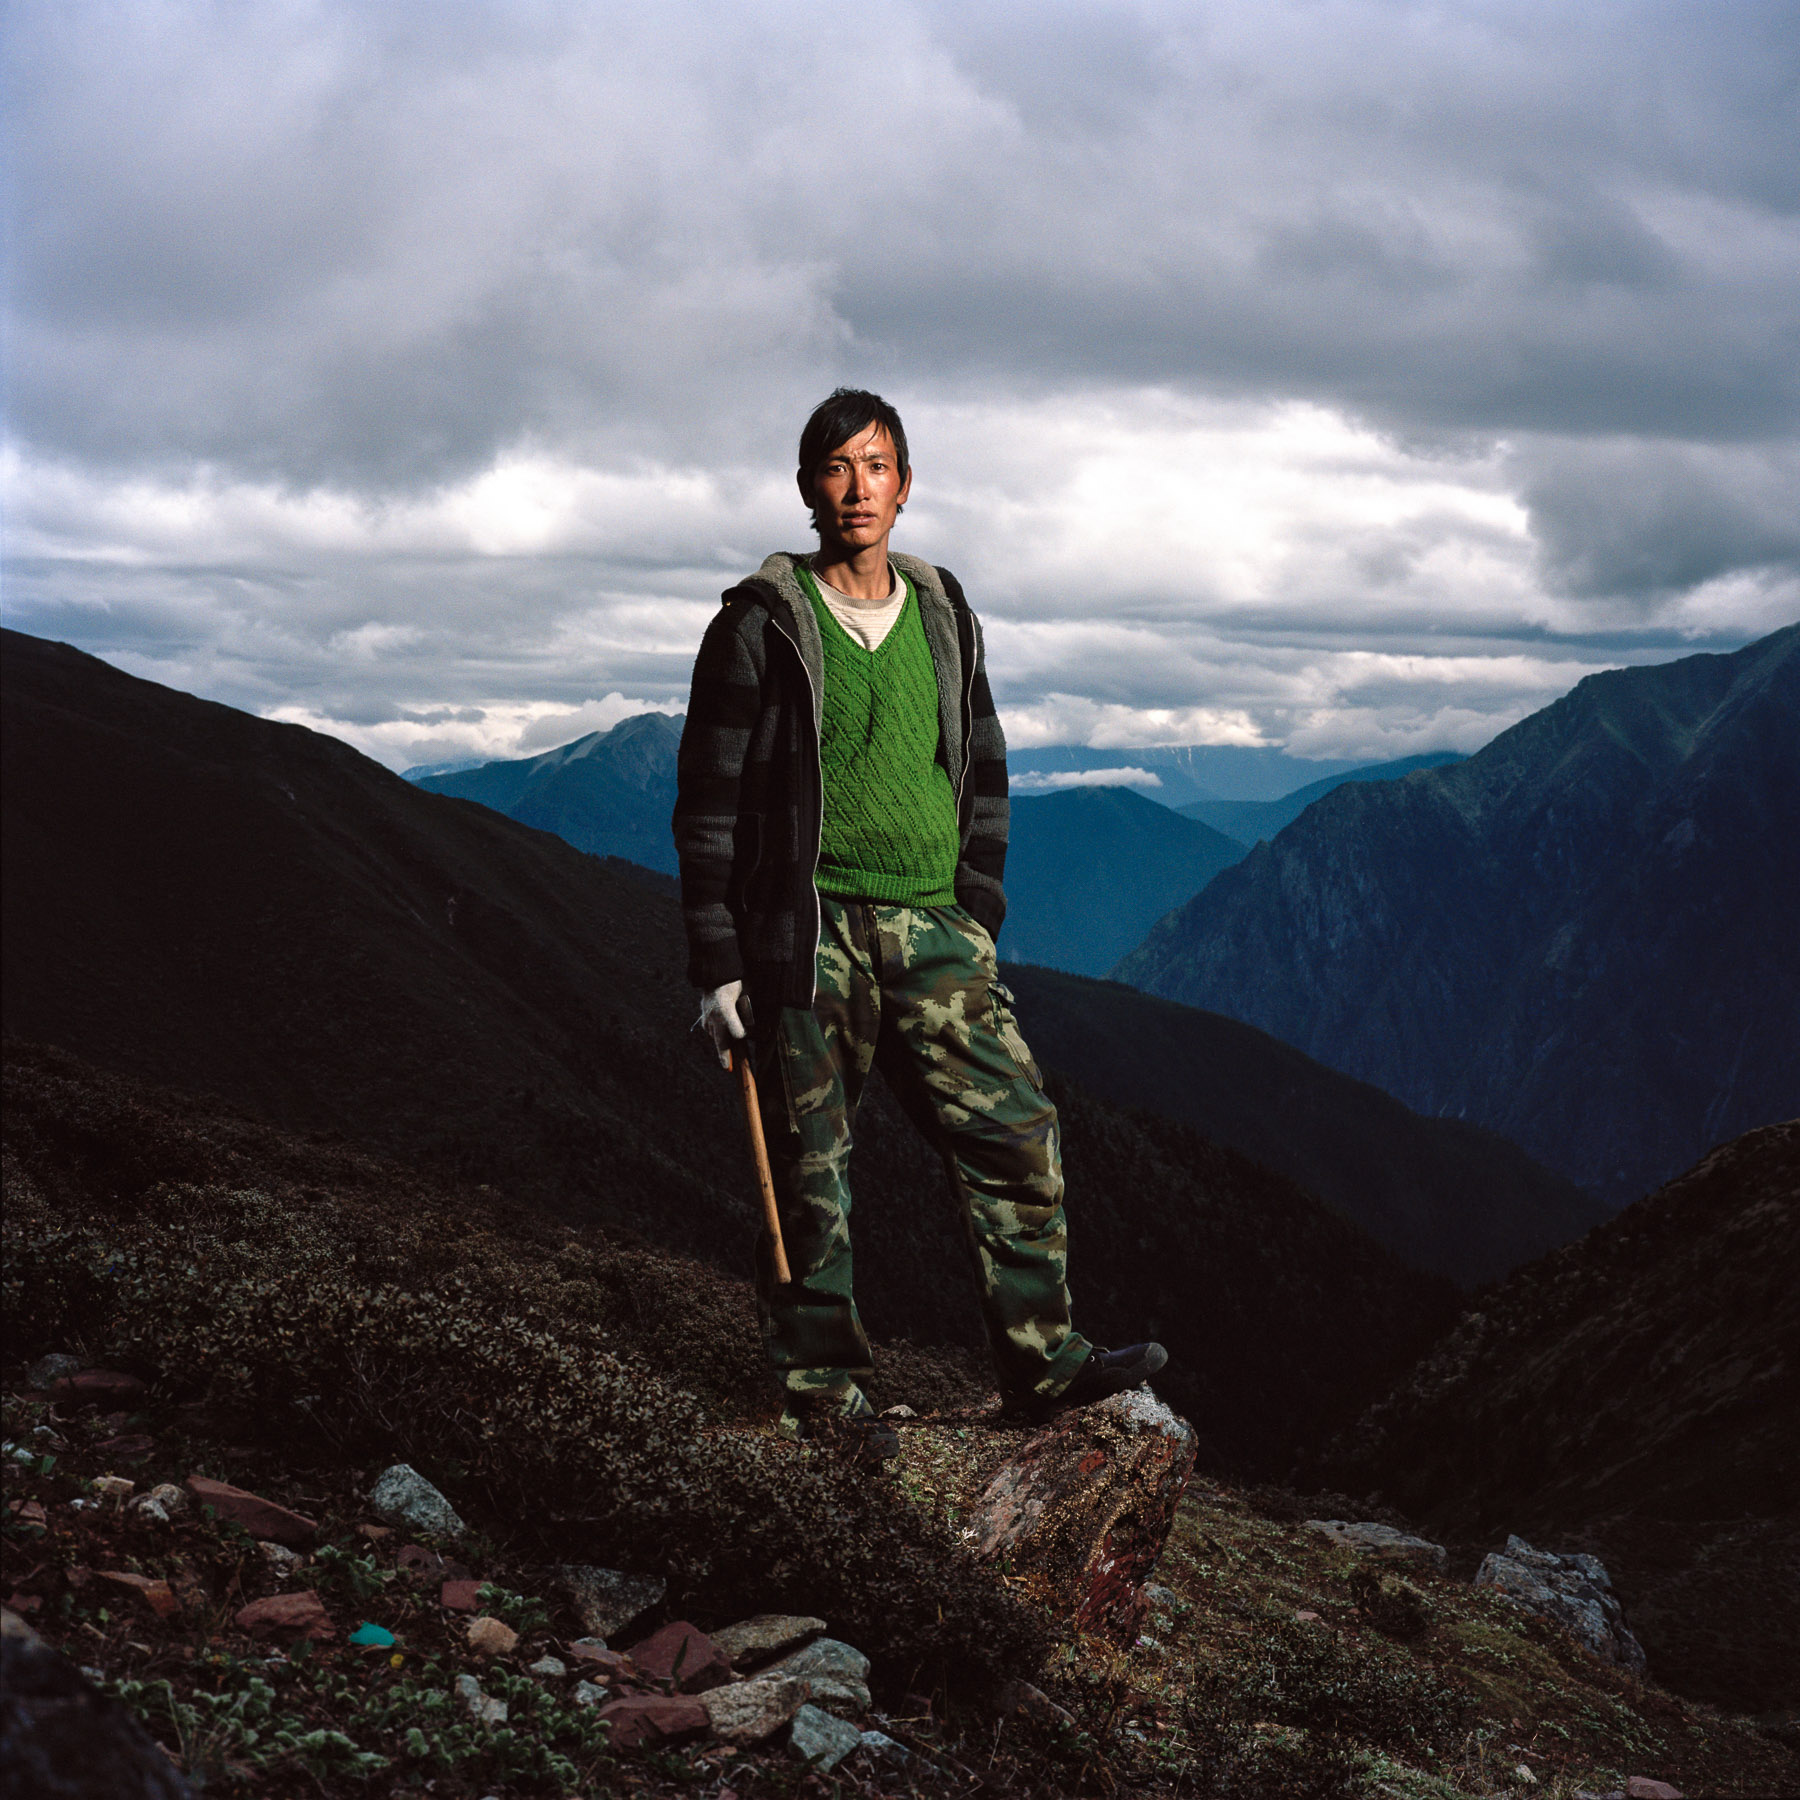  May 2012. Tibet province, China. Portrait of Zhaxi Dorje, 20 years old,  Tibetan caterpillard fungus picker near the Shola Pass basecamp at 4470m high. 